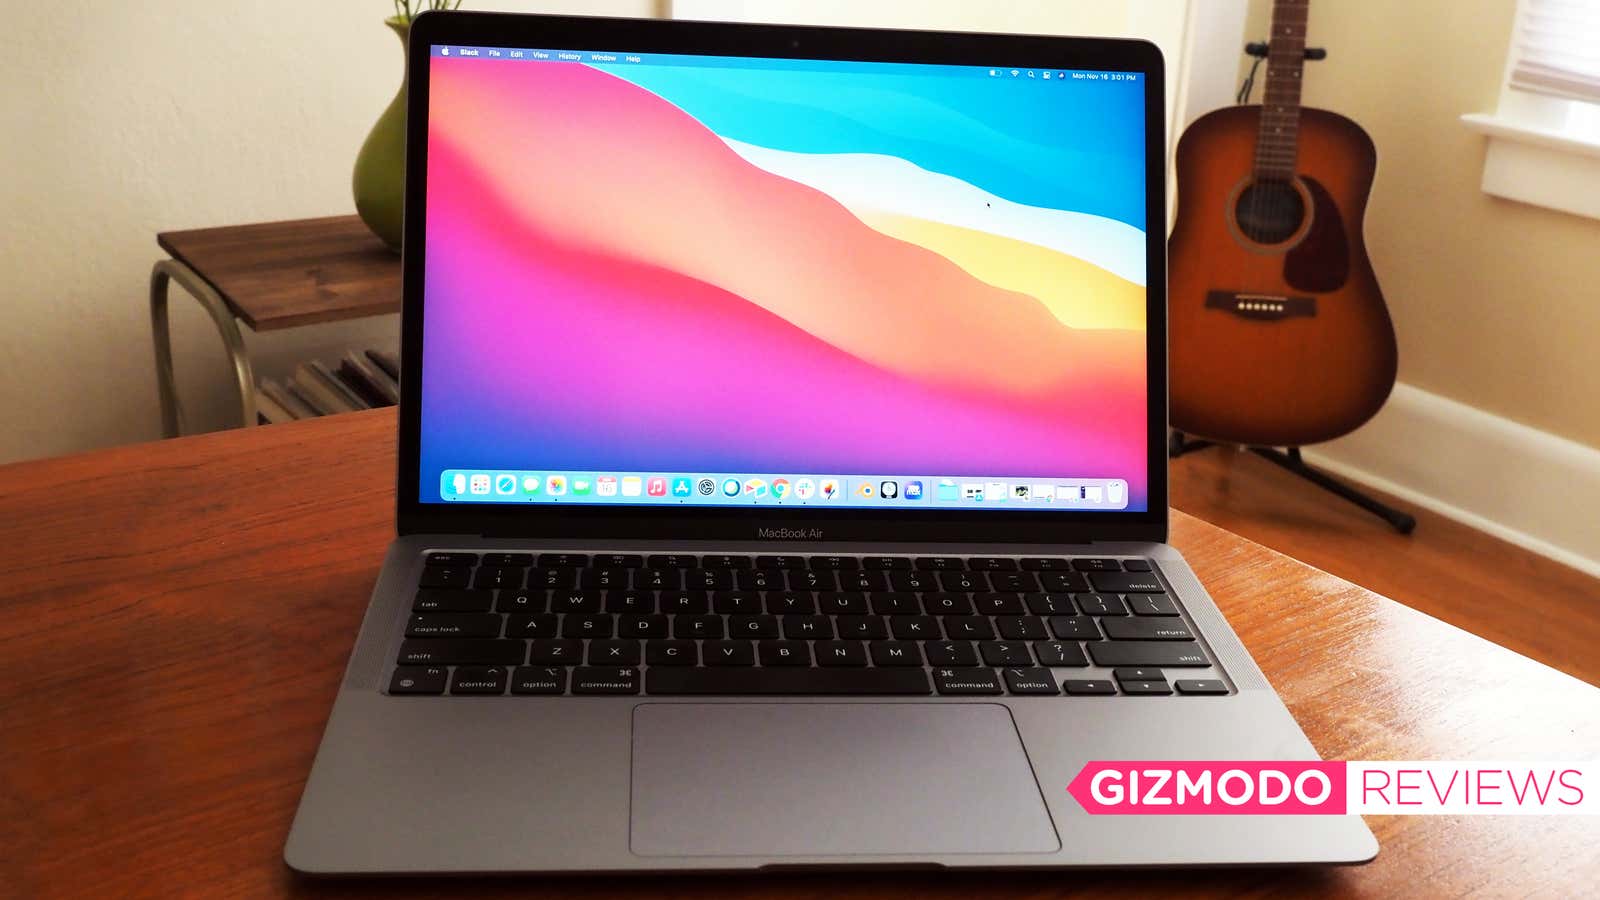 The new MacBook Air looks similar to the old ones, but under the hood, things are very different.